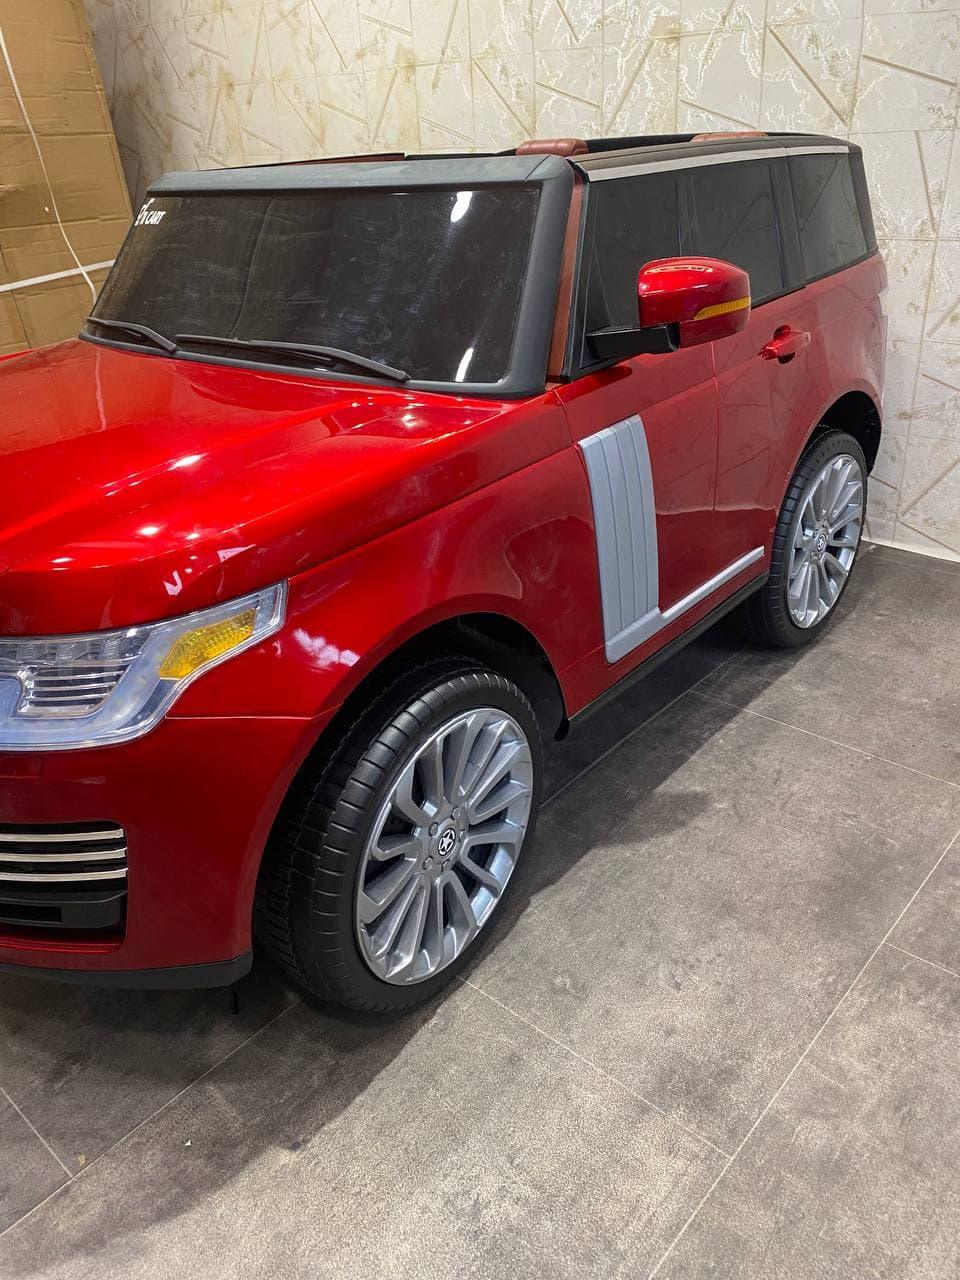 2022 Dual Seat Range Rover Ride on Car for Kids 4 Wheel Drive - 11Cart